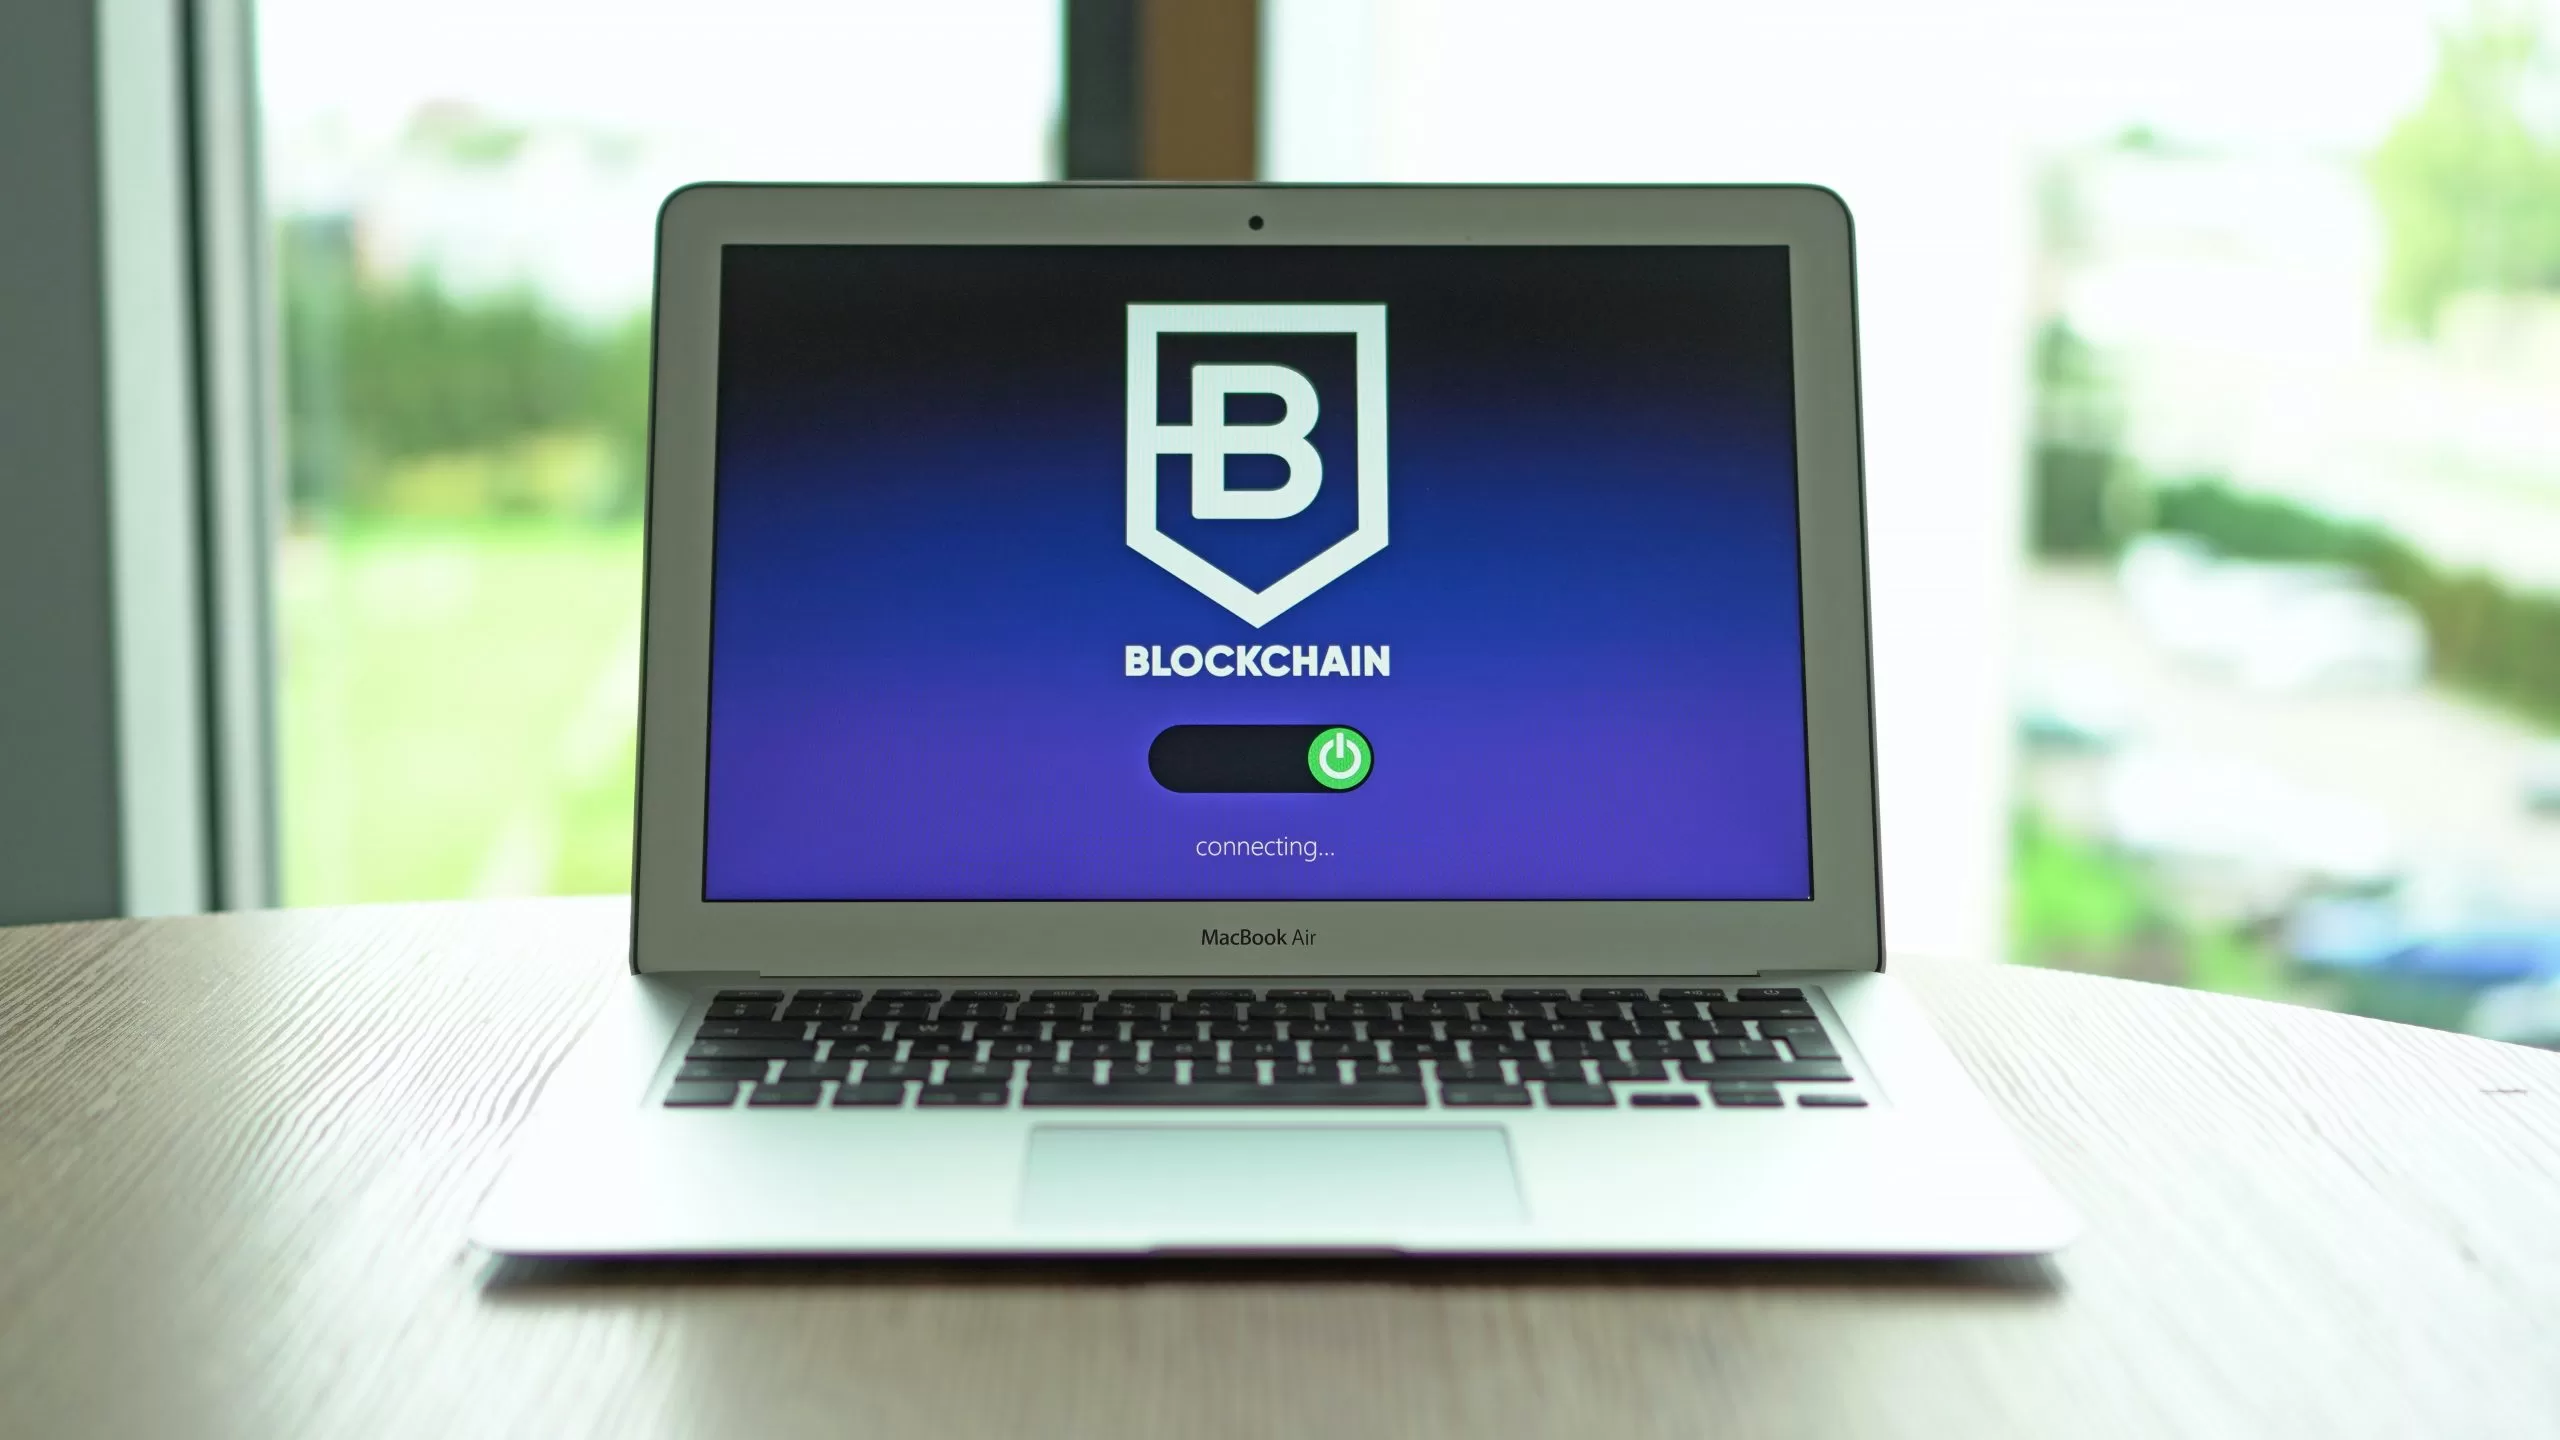 Image of a laptop showing the word "Blockchain" to denote blockchain in logistics